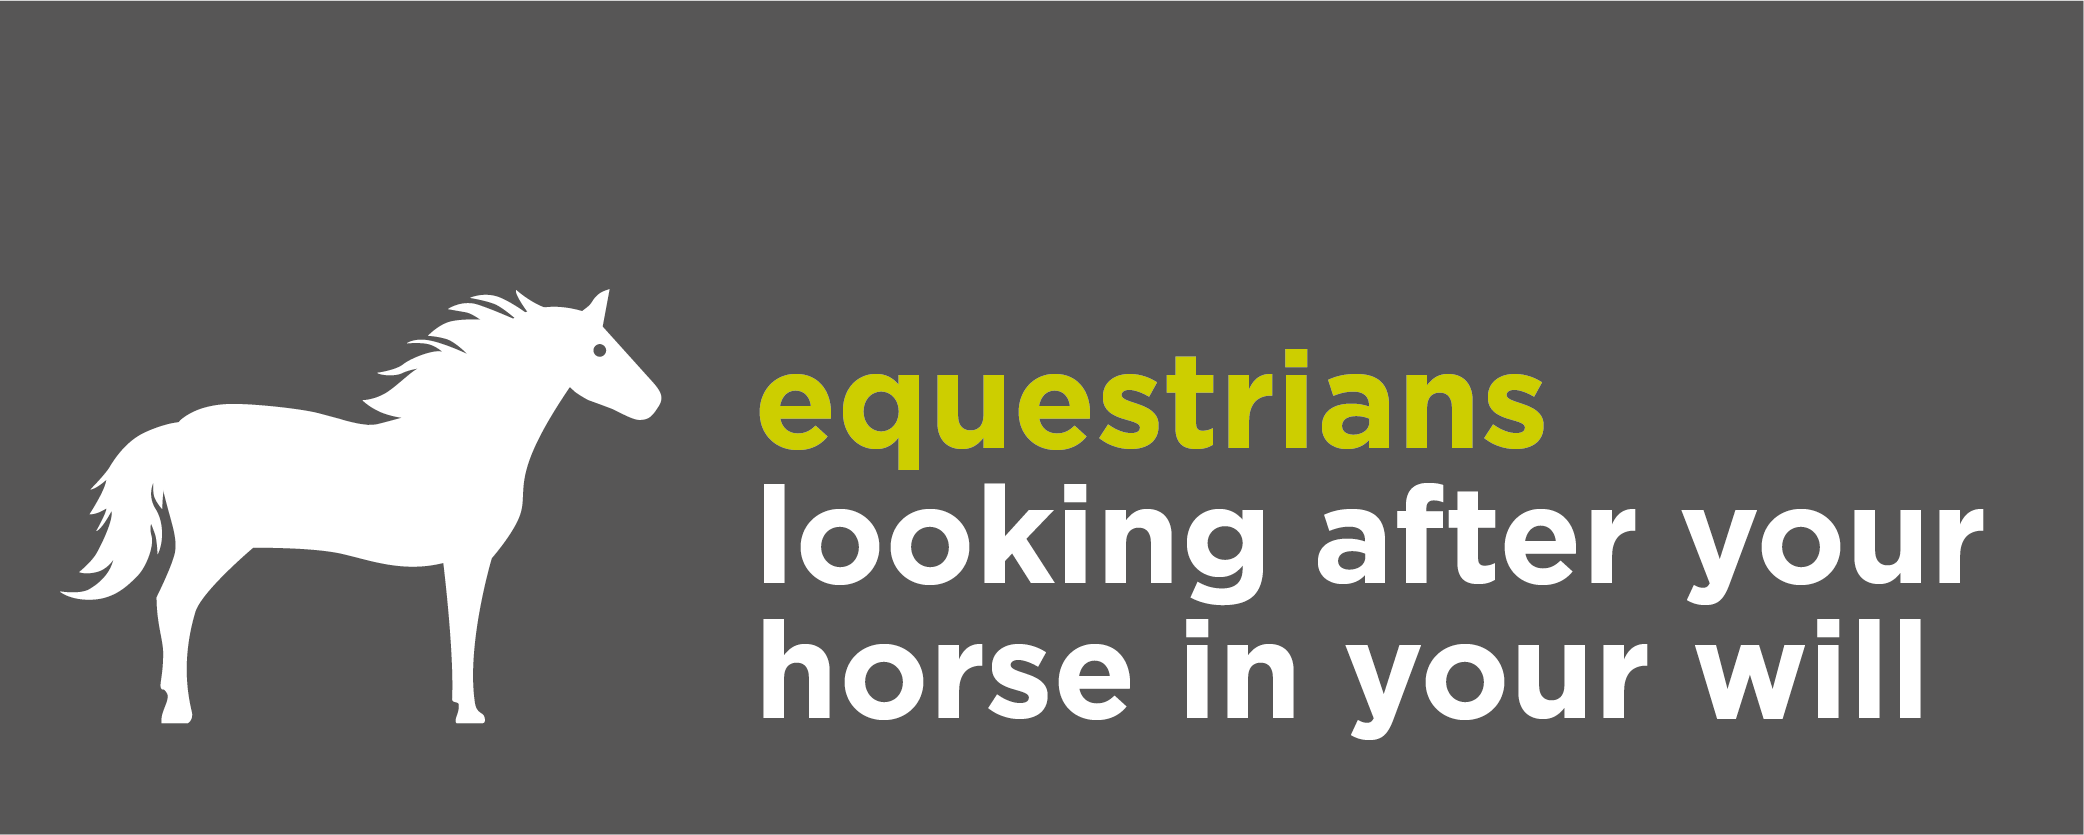 Equestrians - looking after your horse in your will